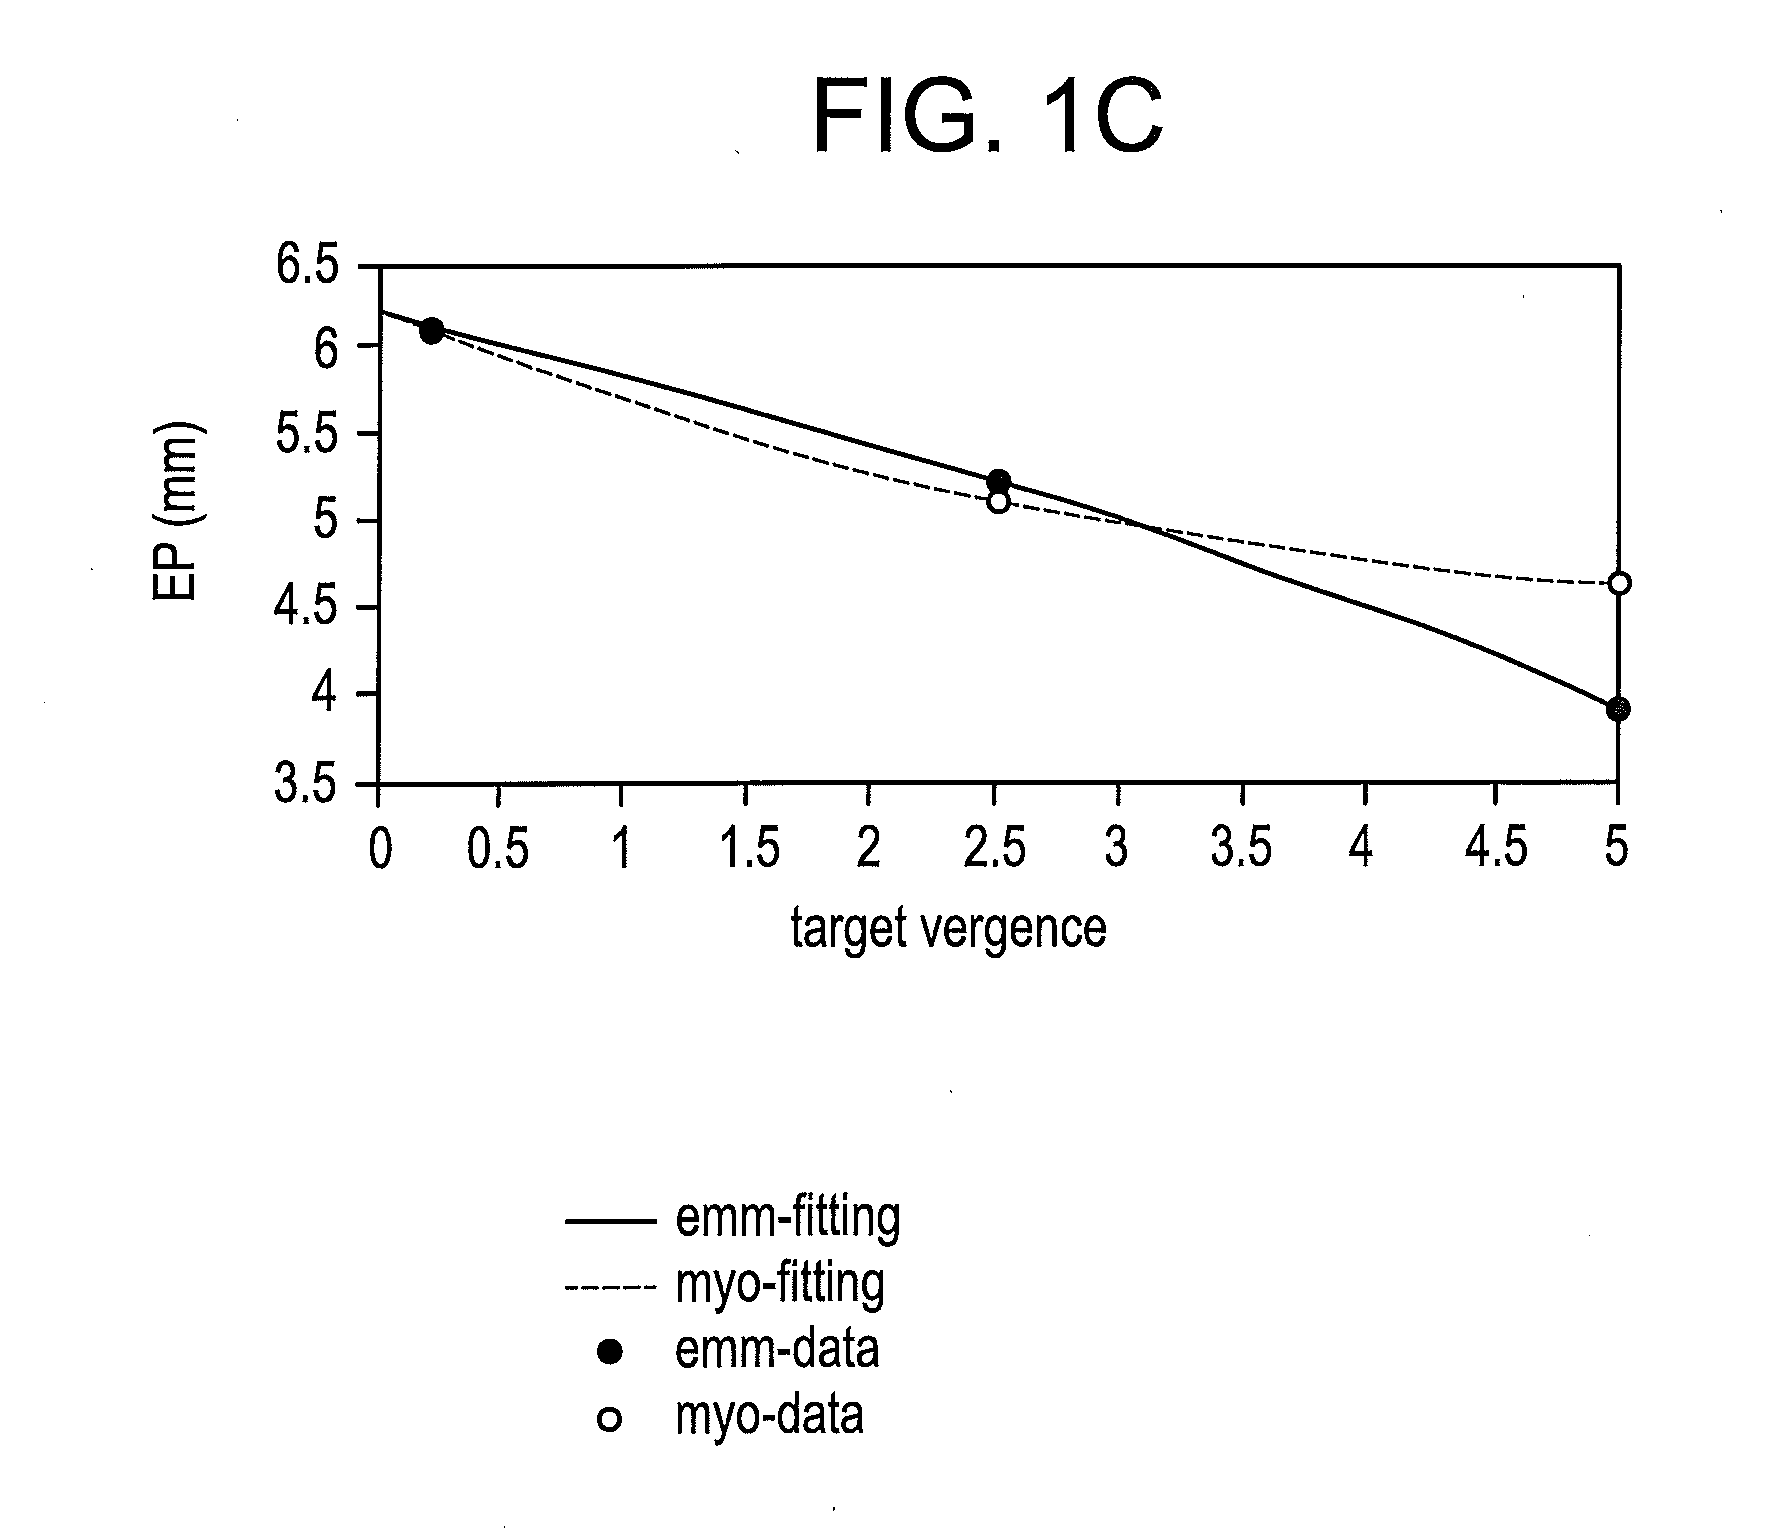 Freeform lens design and method for preventing and/or slowing myopia progression